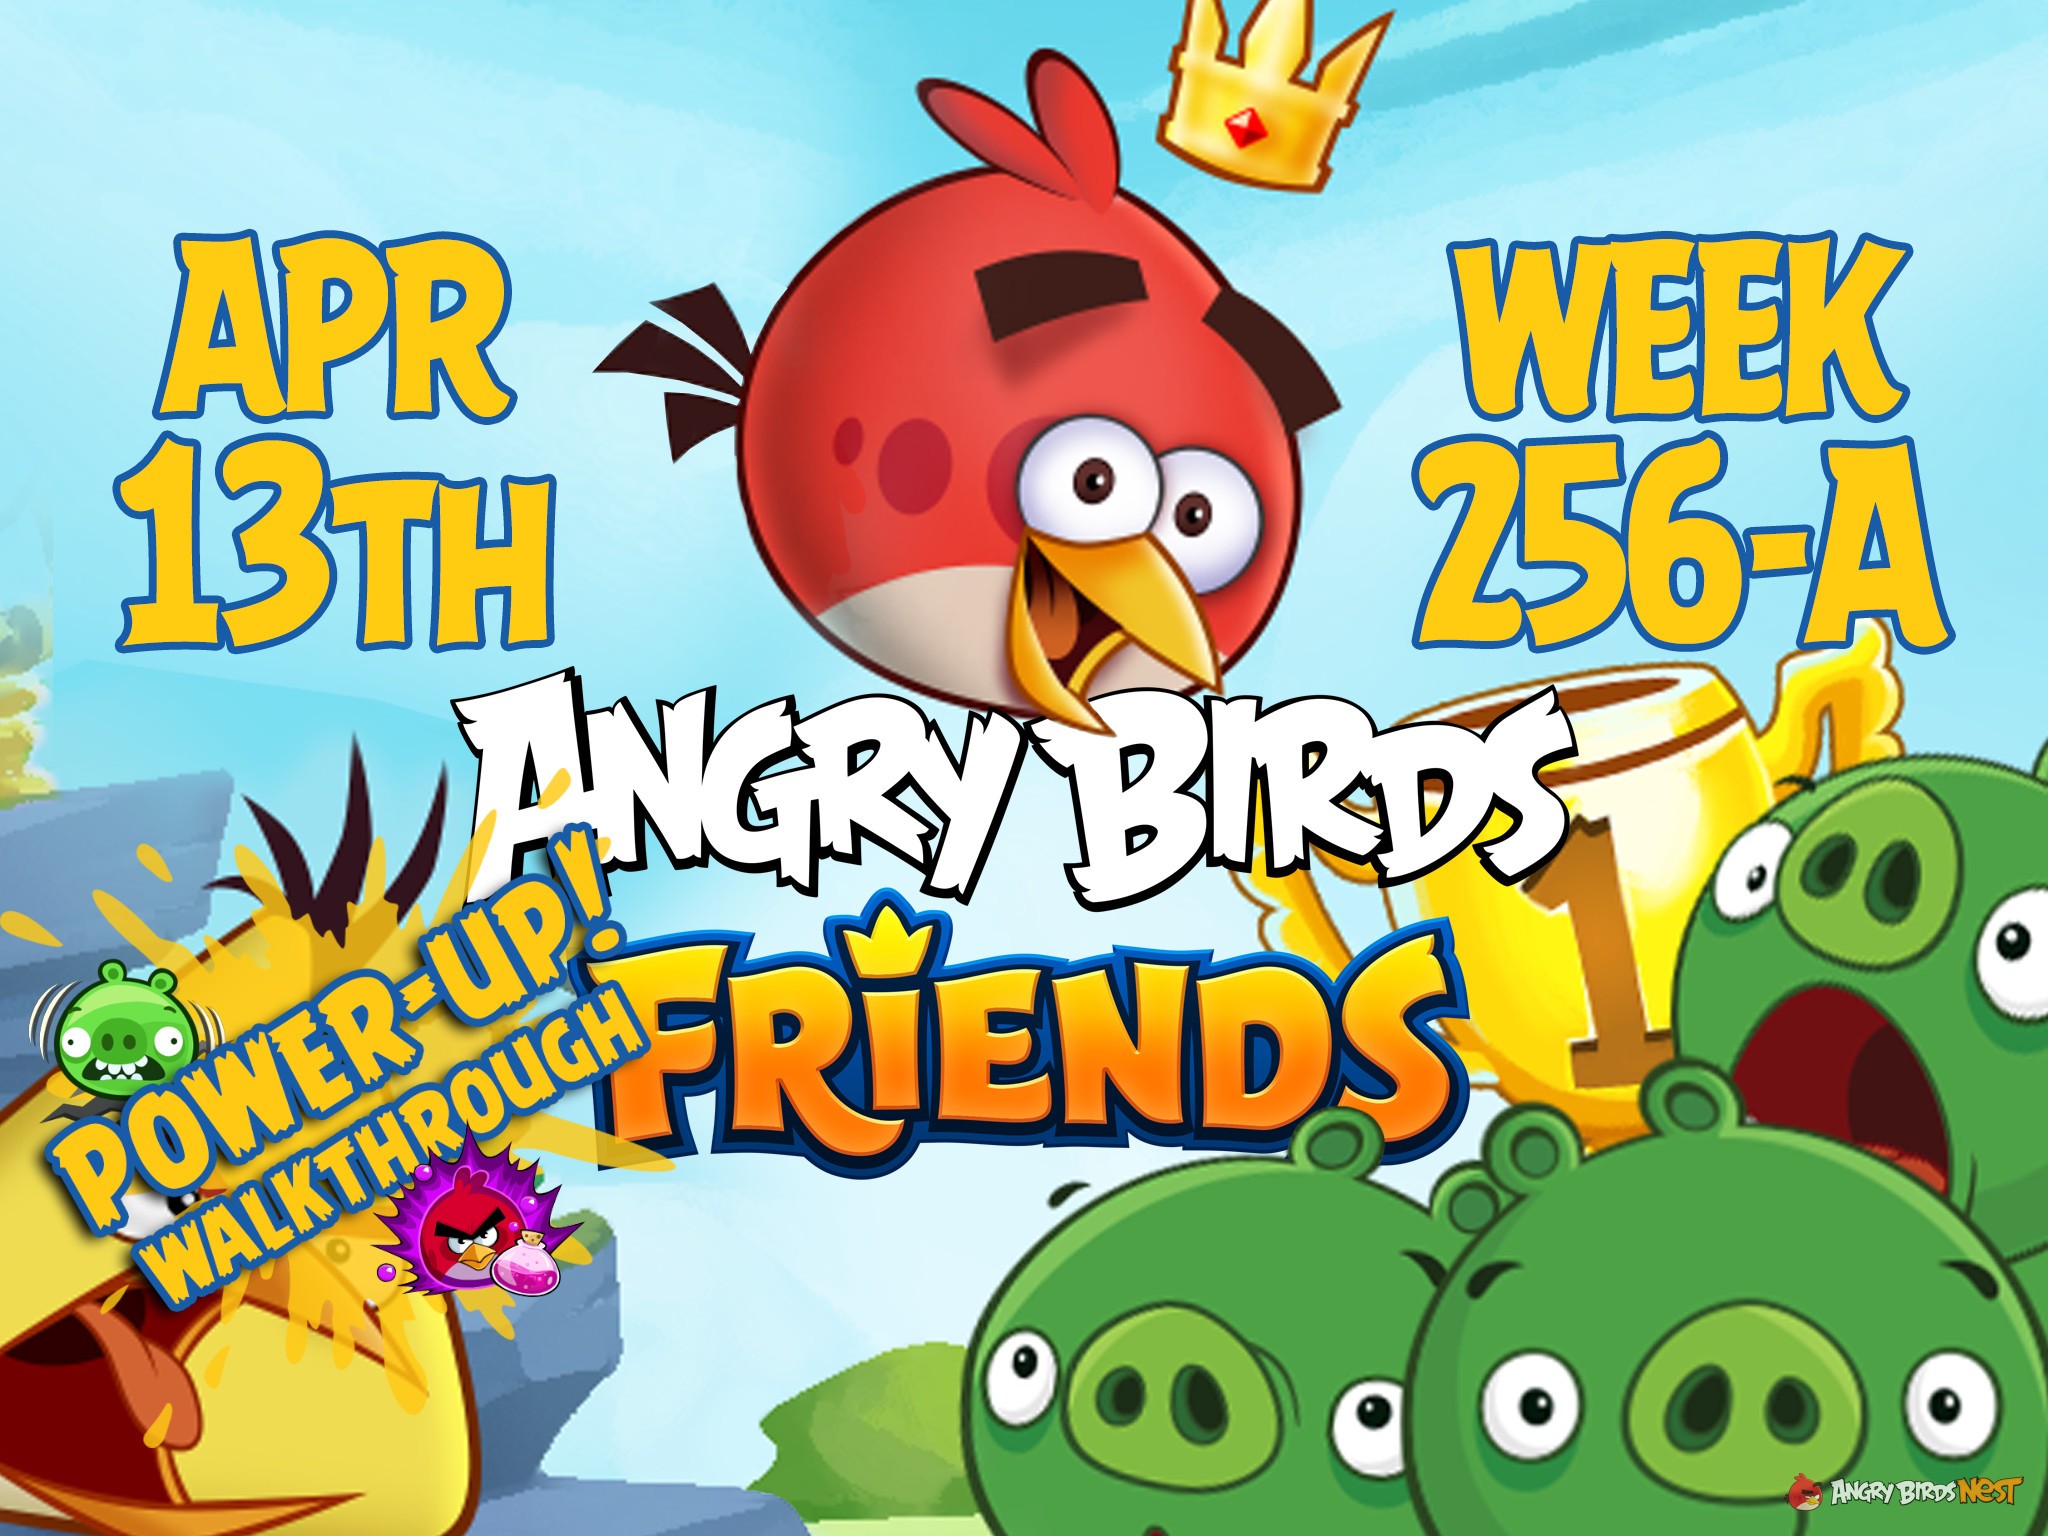 Angry Birds Friends Tournament Week 256-A Feature Image PU